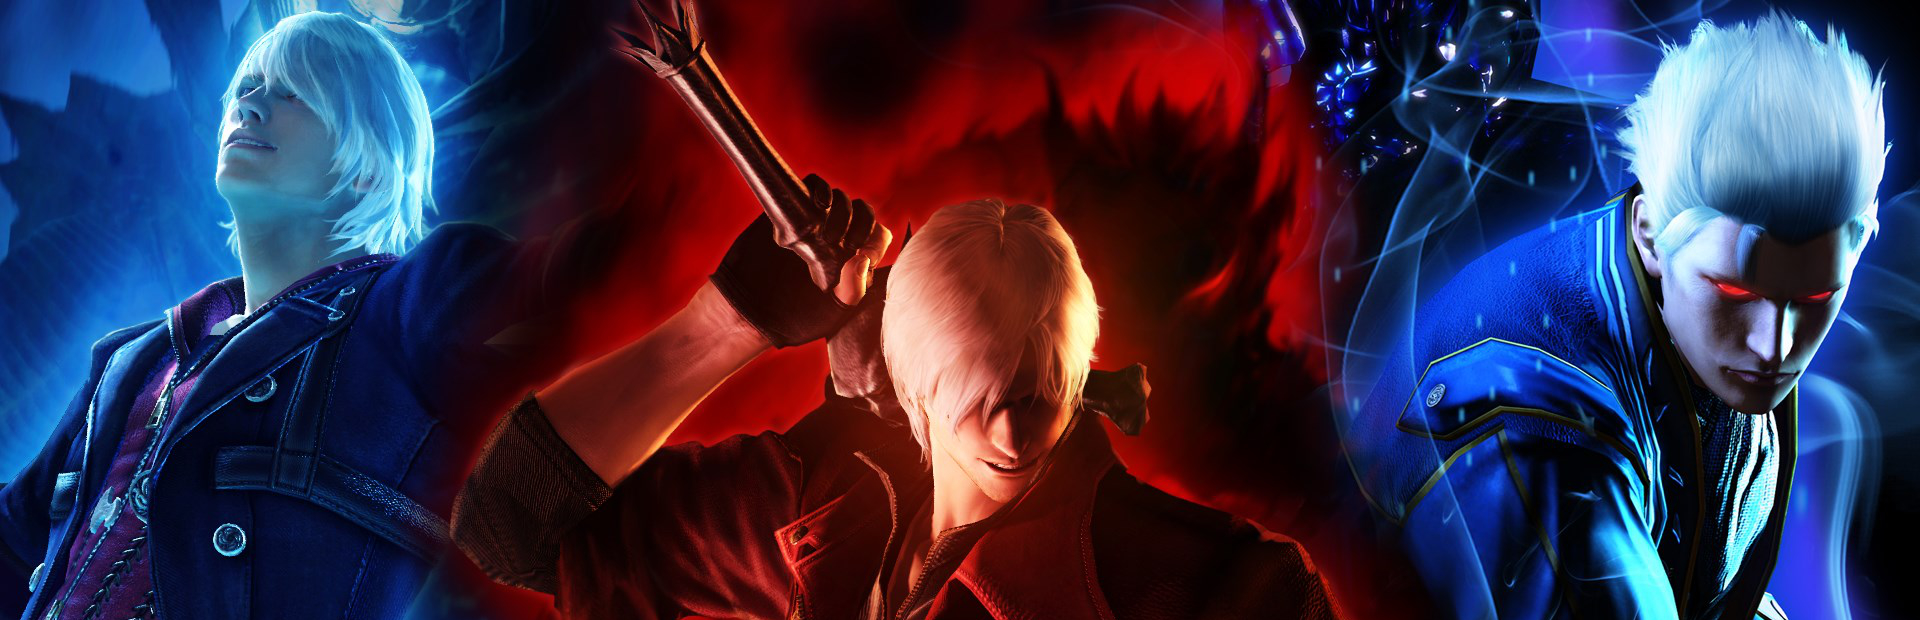 Stream Devil May Cry 4 Vergil Theme by Legendary_8chaos